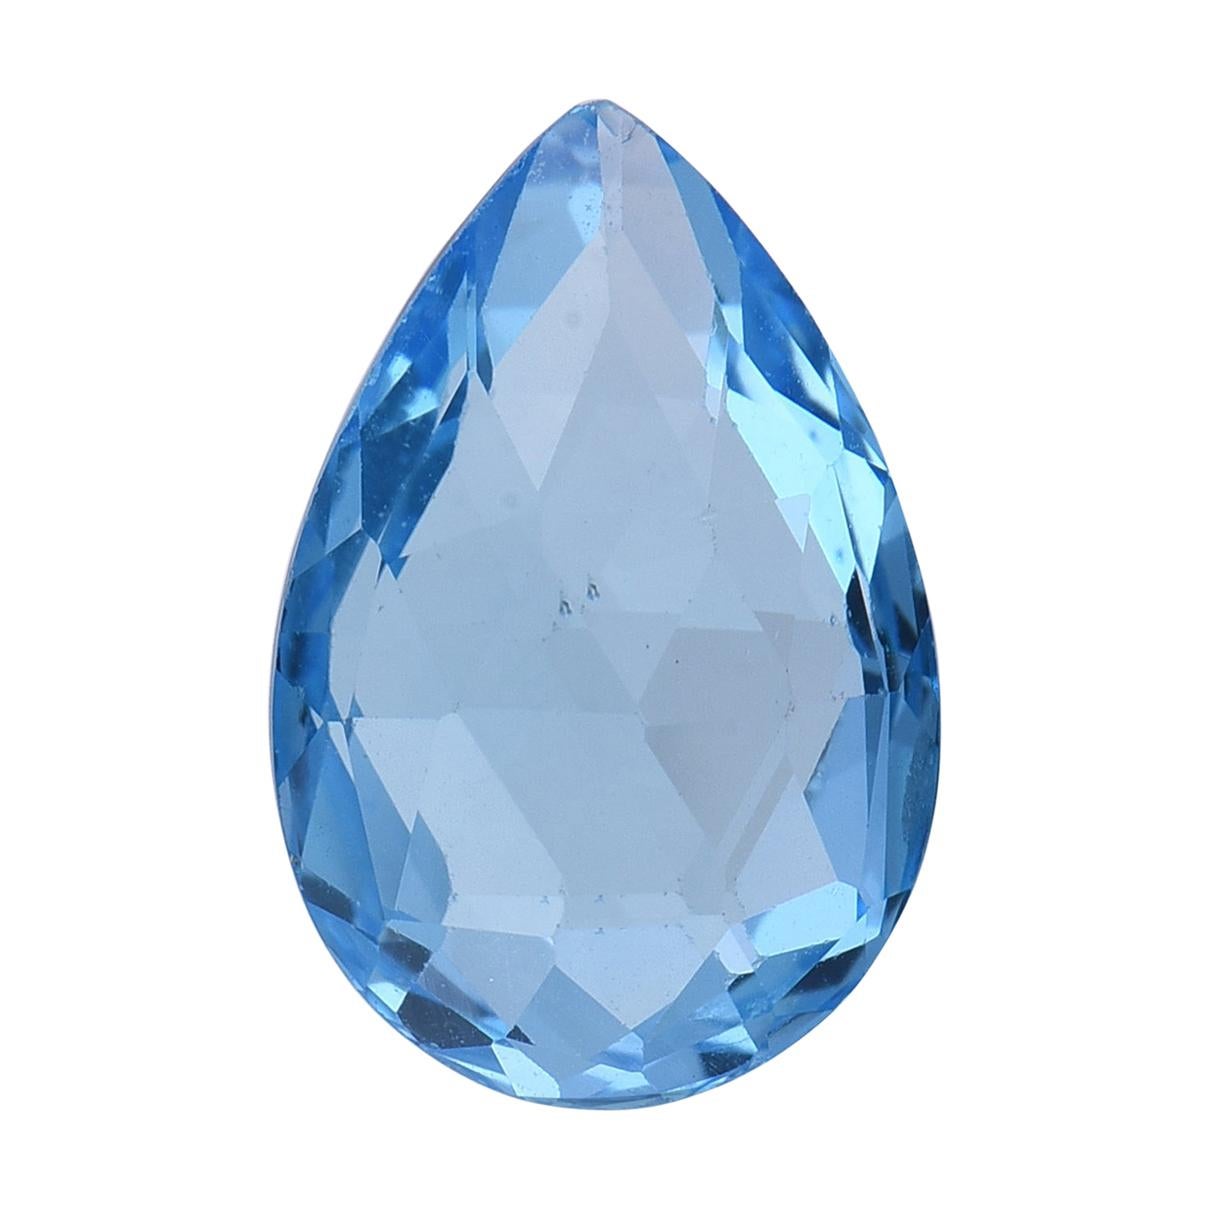 TJD Loose Natural Swiss Blue Topaz 7.26 Cts Pear Shape Gemstone for Ring/Pendant